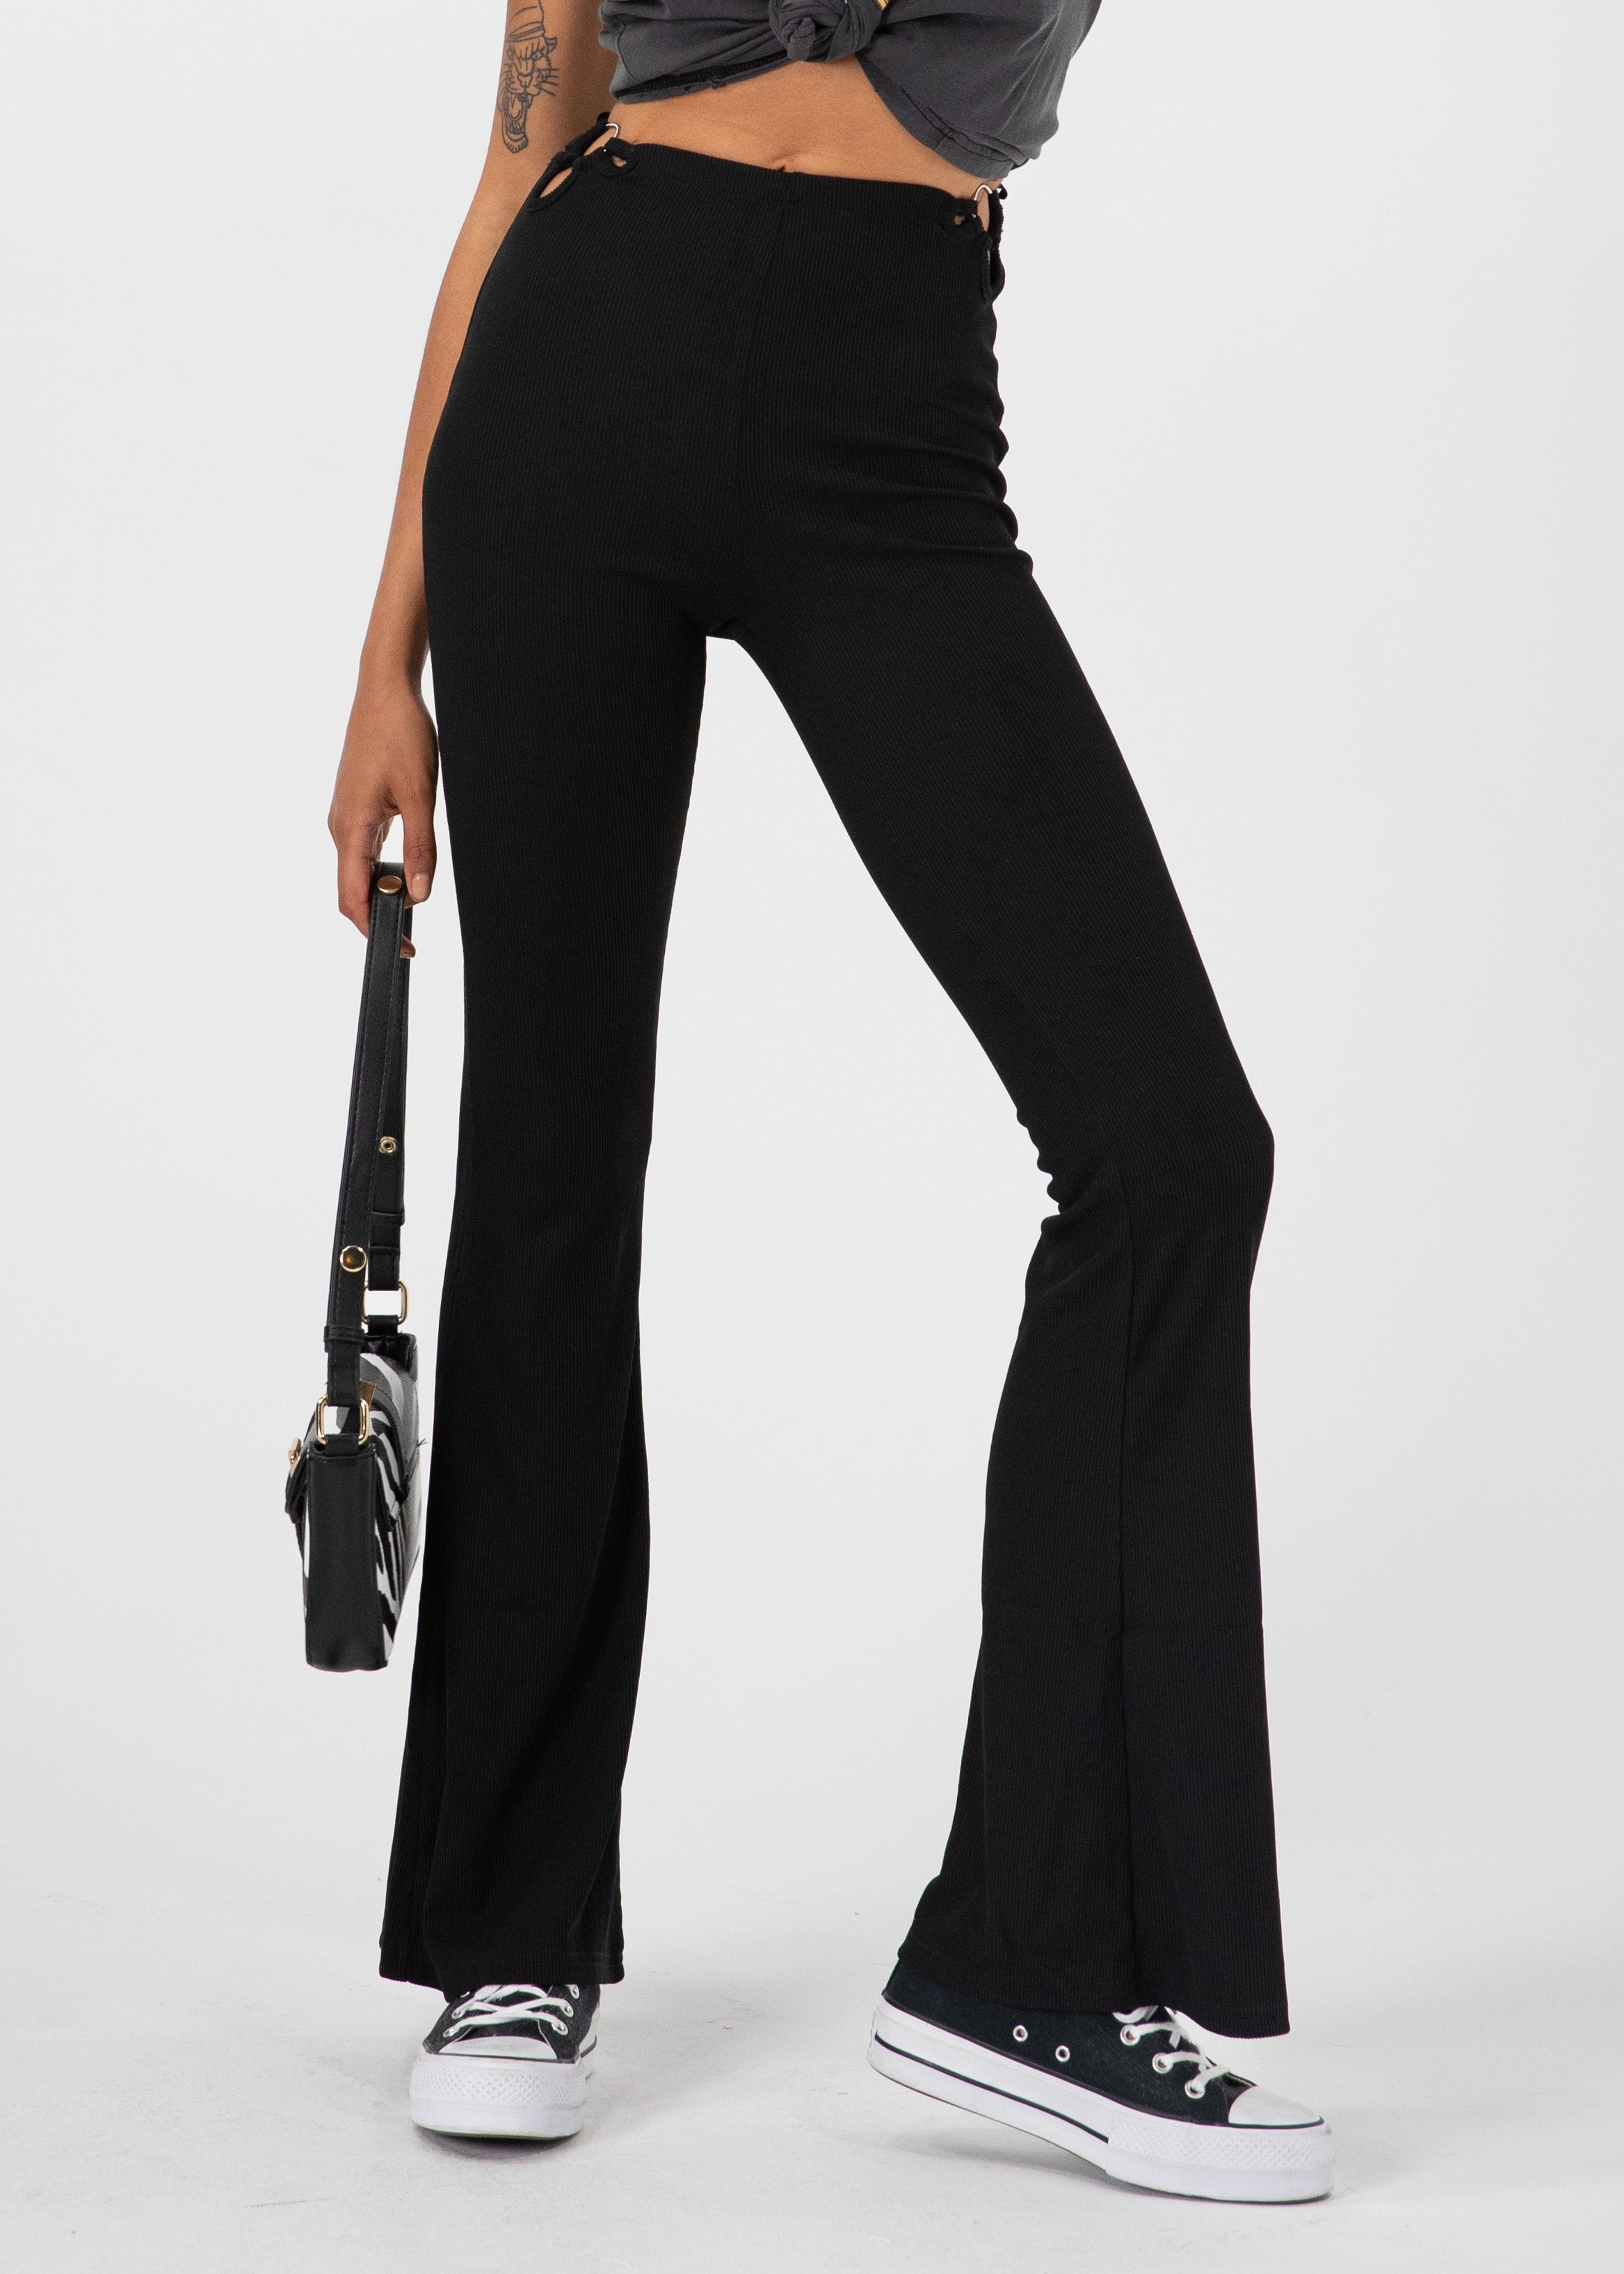 Nobody Knows Flare Pants - Black